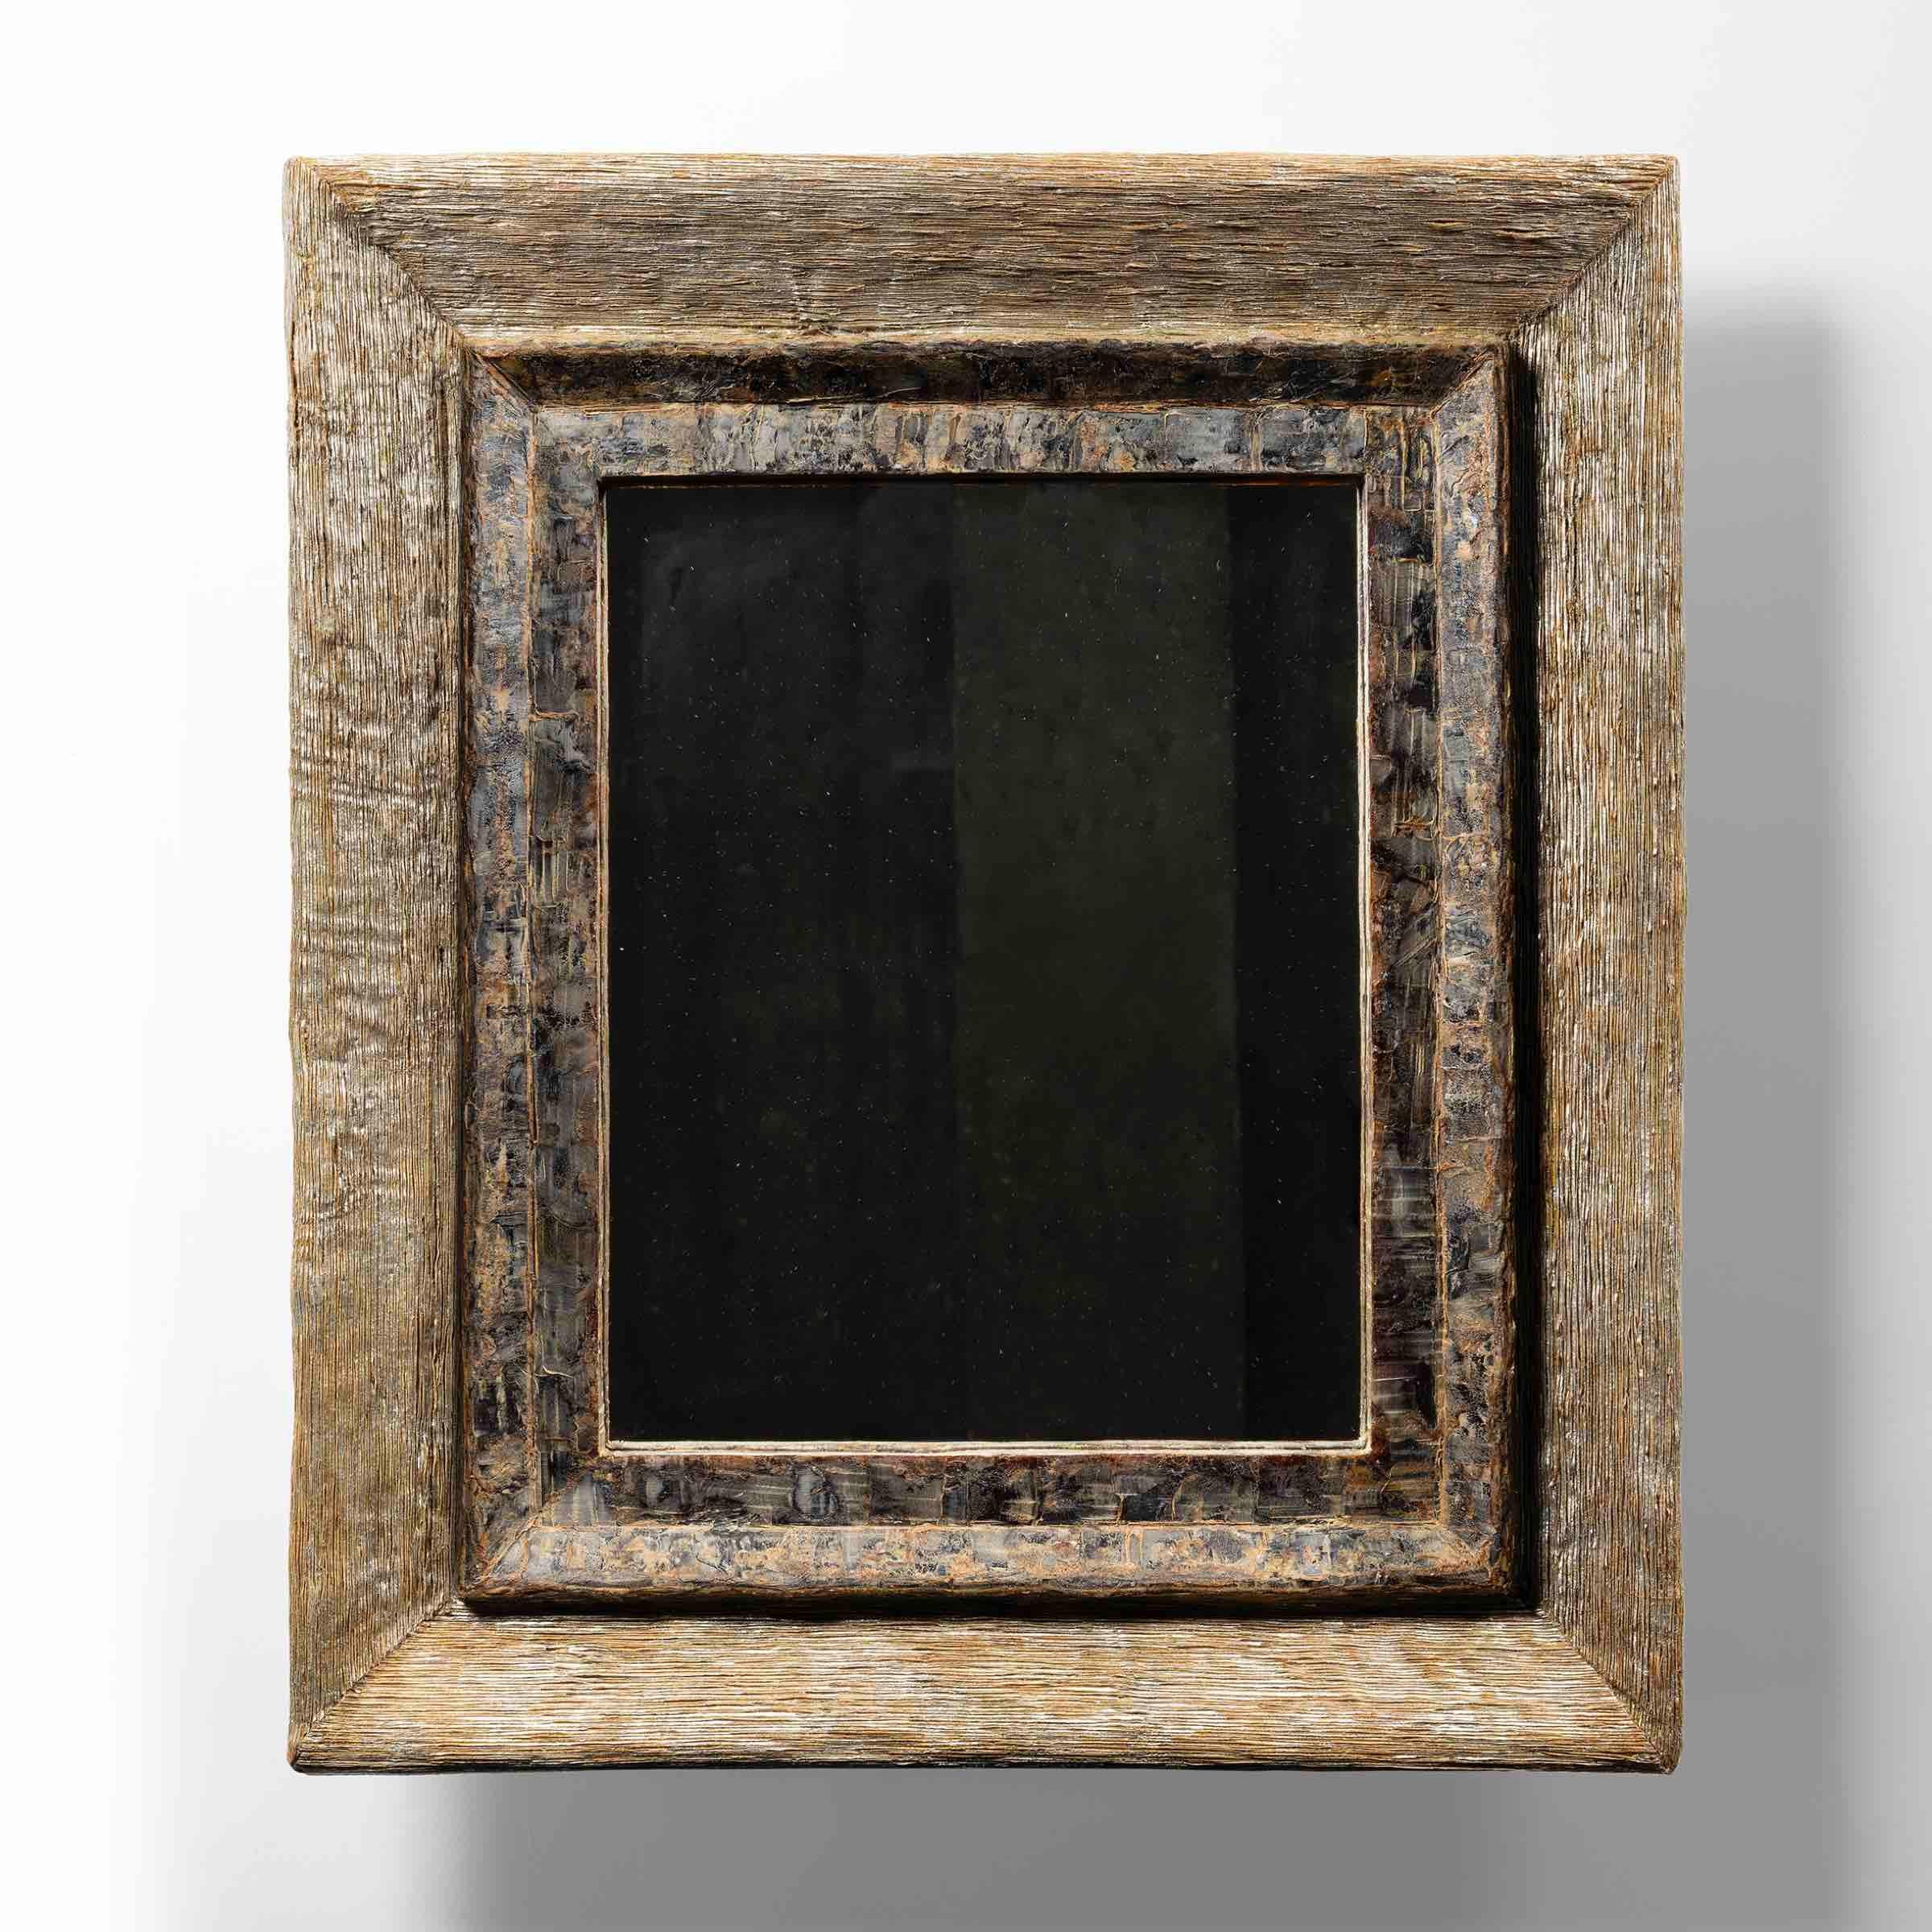 Rectangular mirror by Line Vautrin.
Structure in light tortoiseshell coloured talosel covered with lumaline threads on its outer frame by Line Vautrin.
The interior frame is worked in an Africanist spirit or “art-brut”.
Flat central mirror.
Unique